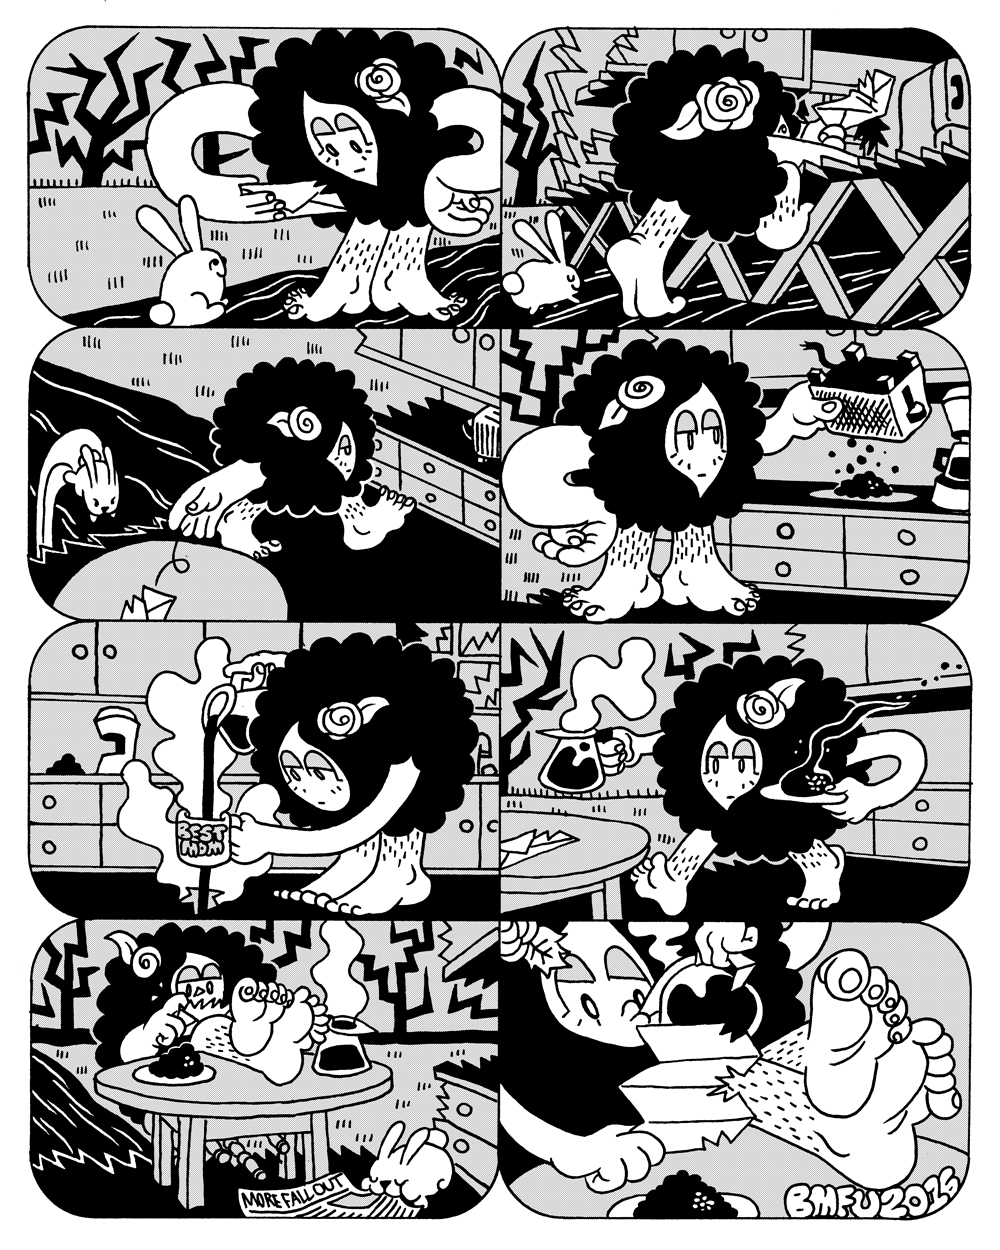 She's Done it All! Part 5 Page 8 by Benjamin Urkowitz by Hazlitt